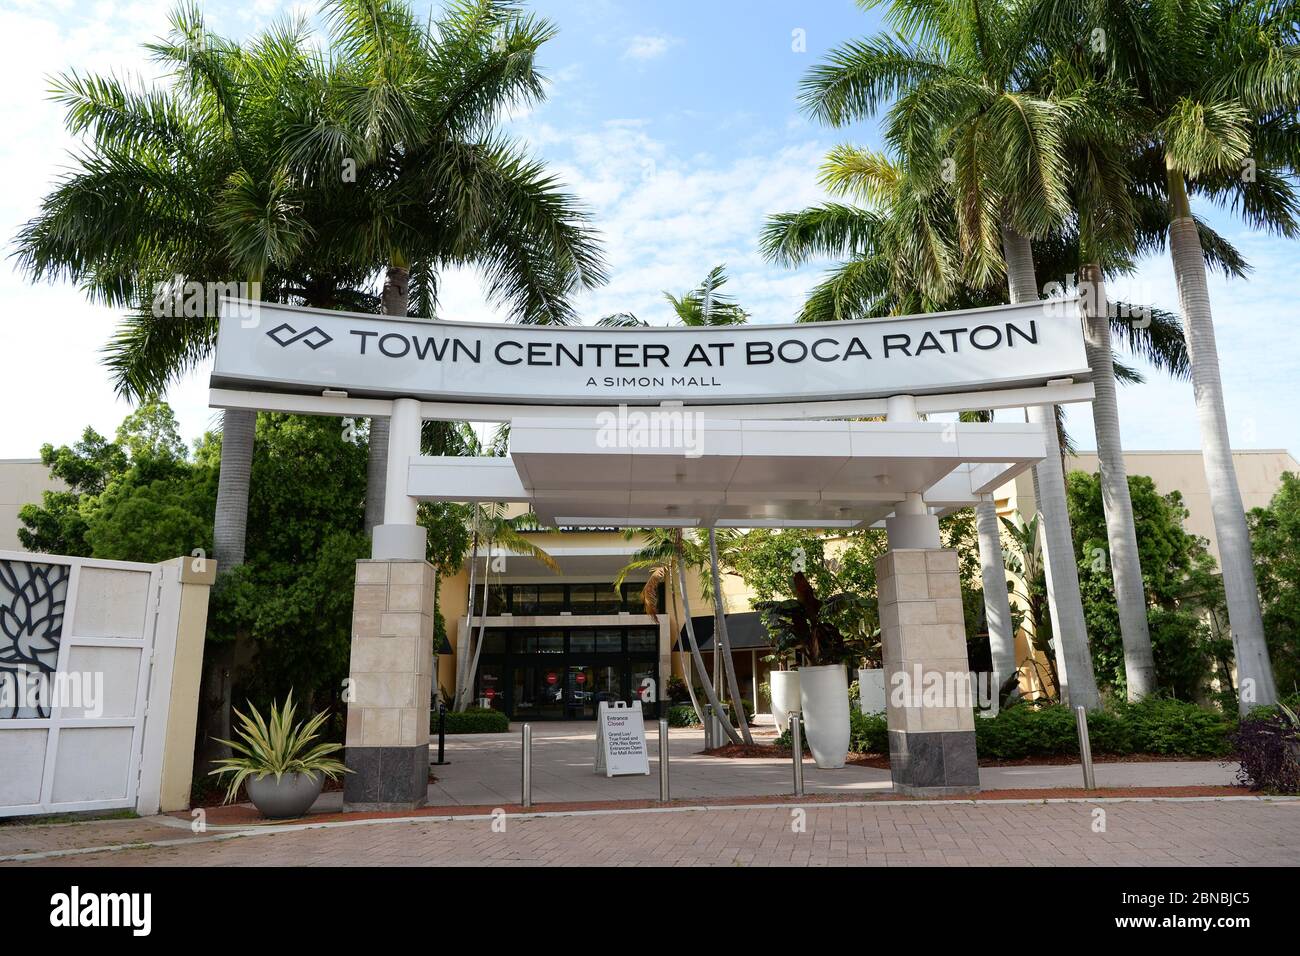 BOCA RATON, FL - MAY 13: A general view of the Boca Raton Town